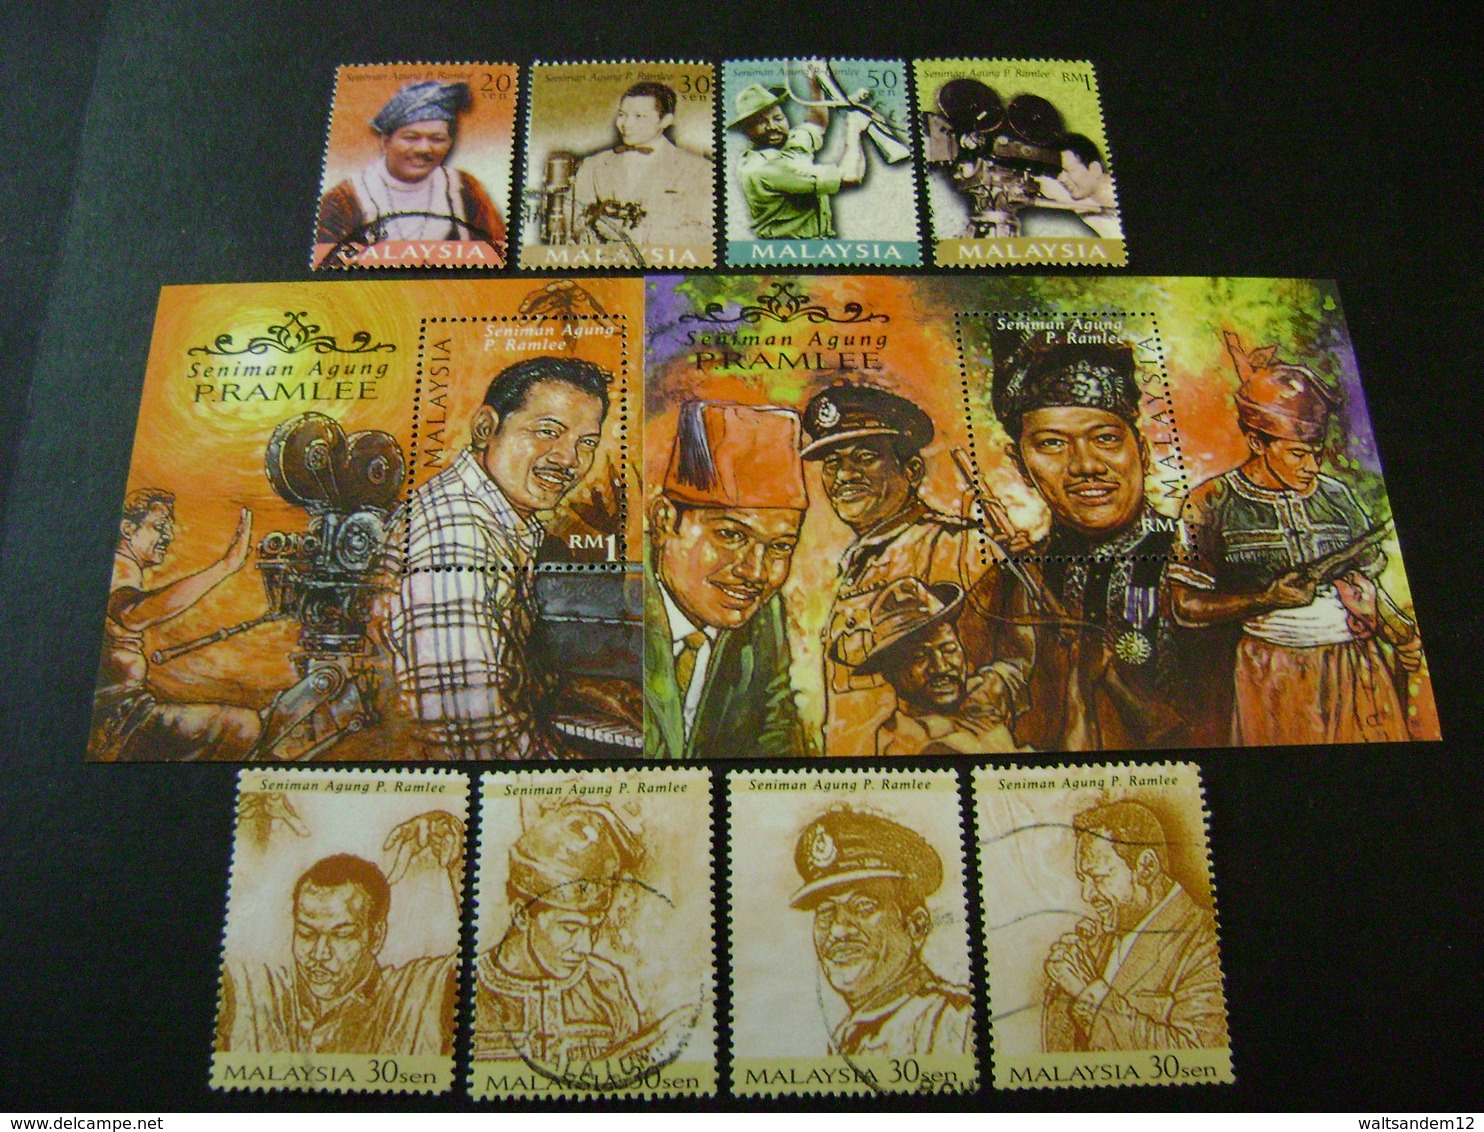 Malaysia 1999 Stamp Issues (between SG 717 And Ms839 - See Description) 7 Images - Used [Sale Price] - Malaysia (1964-...)